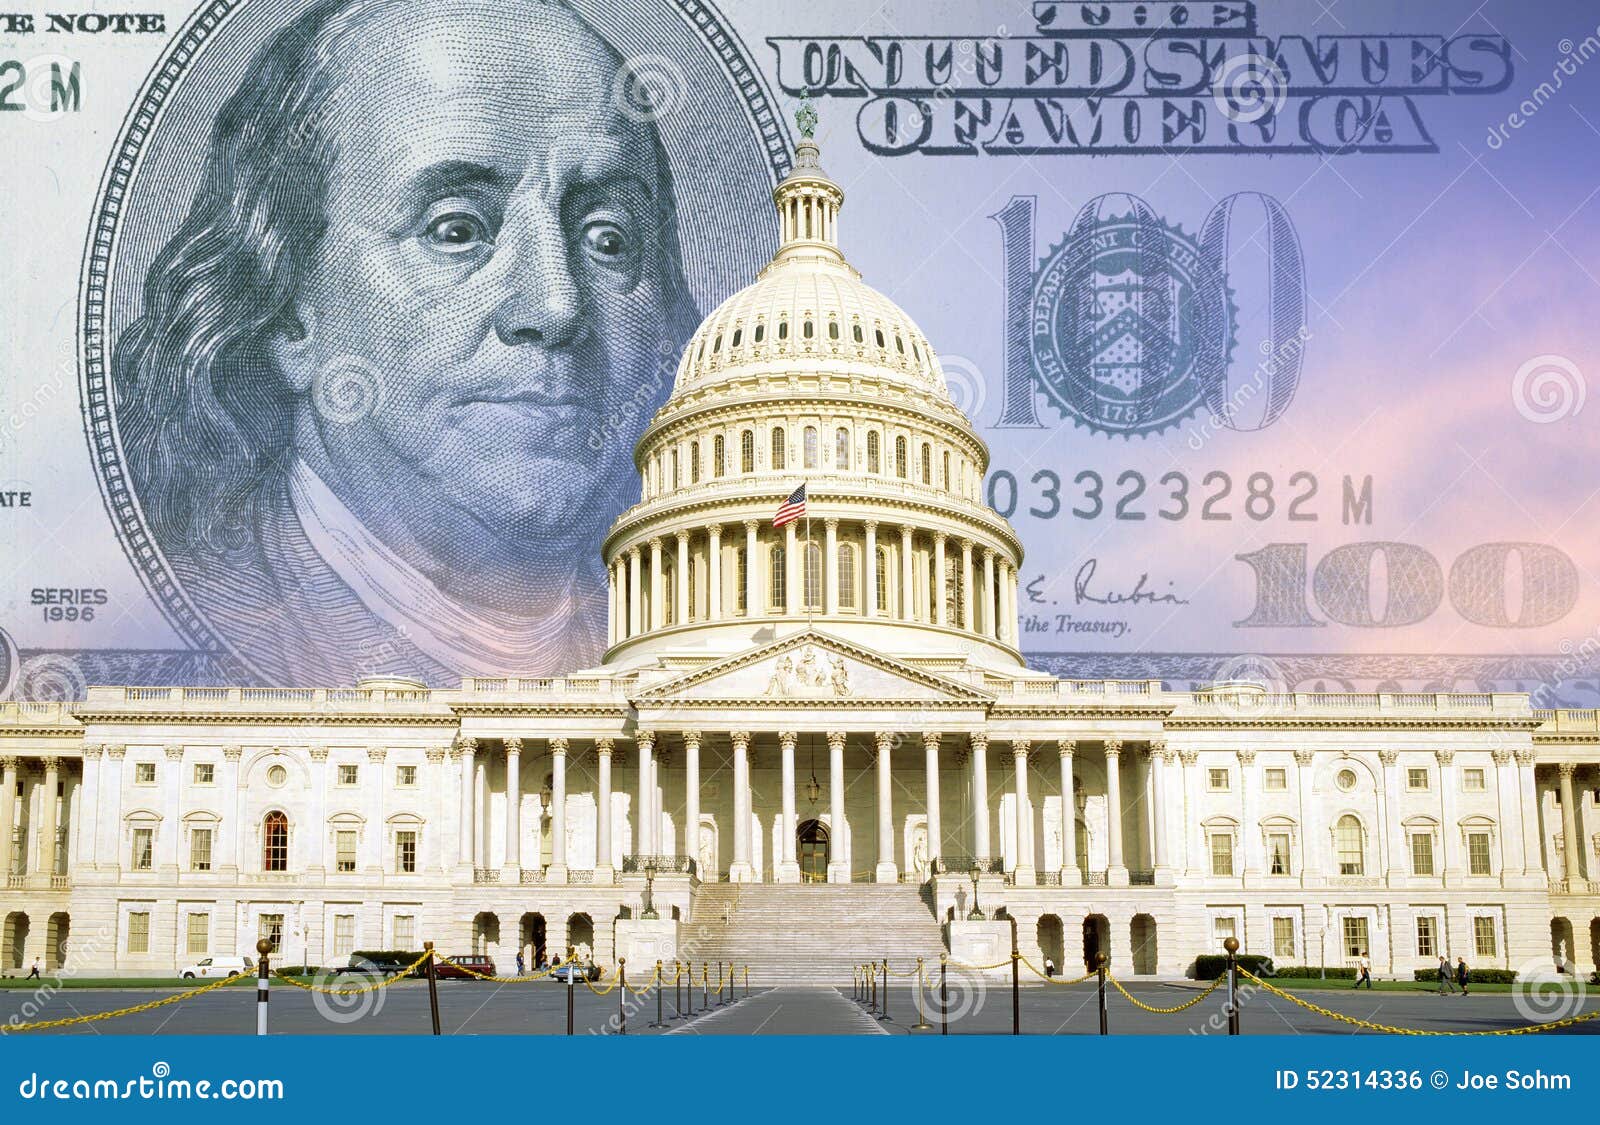 digital composite: u.s. capitol with one hundred dollar bill